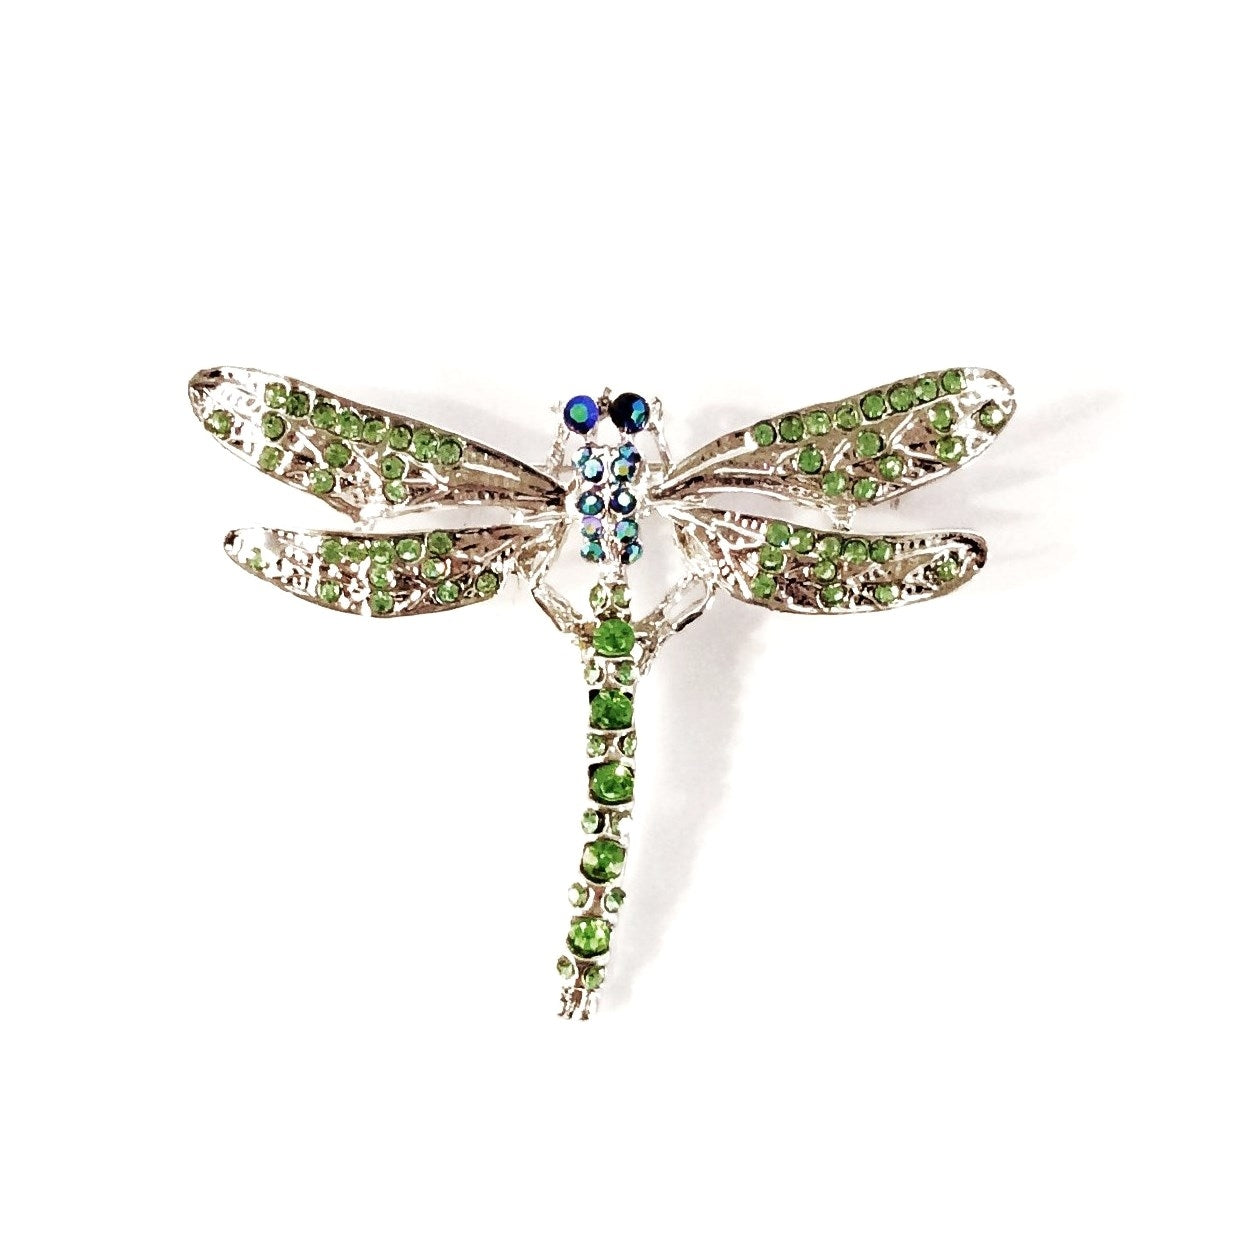 Dragonfly Pin #28-111151GN (Green)